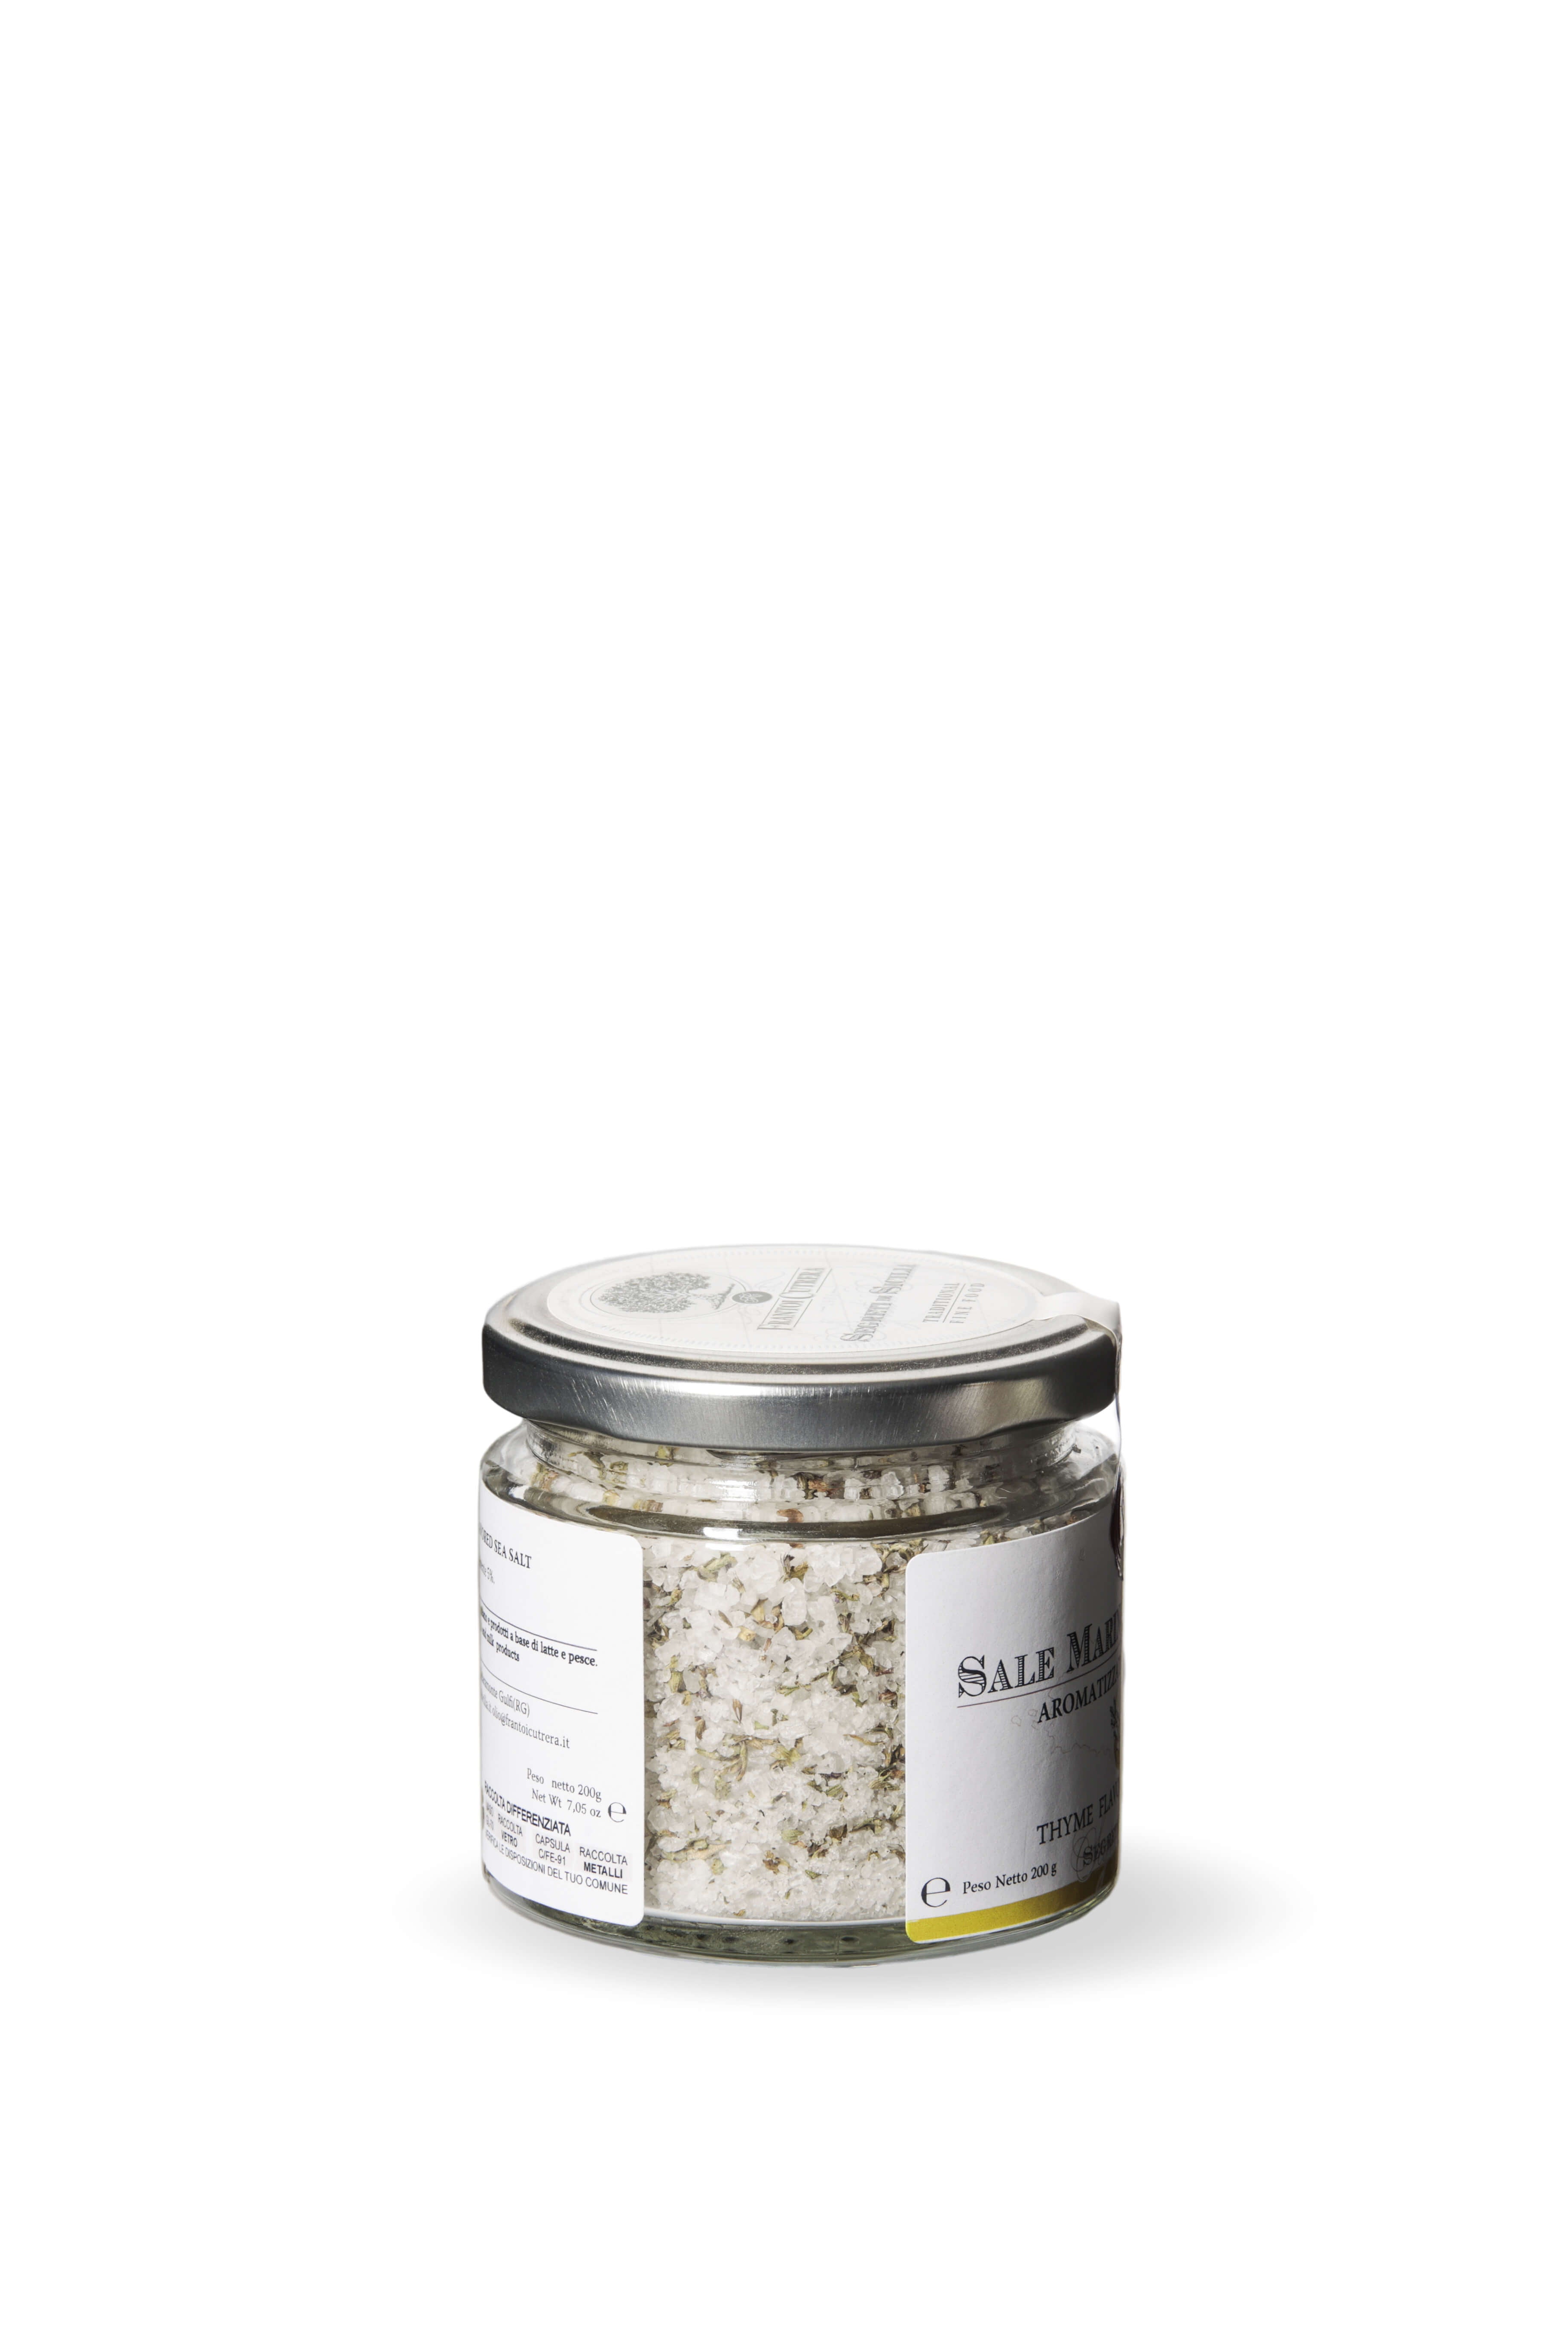 Sicilian Sea Salt Flavored with Thyme